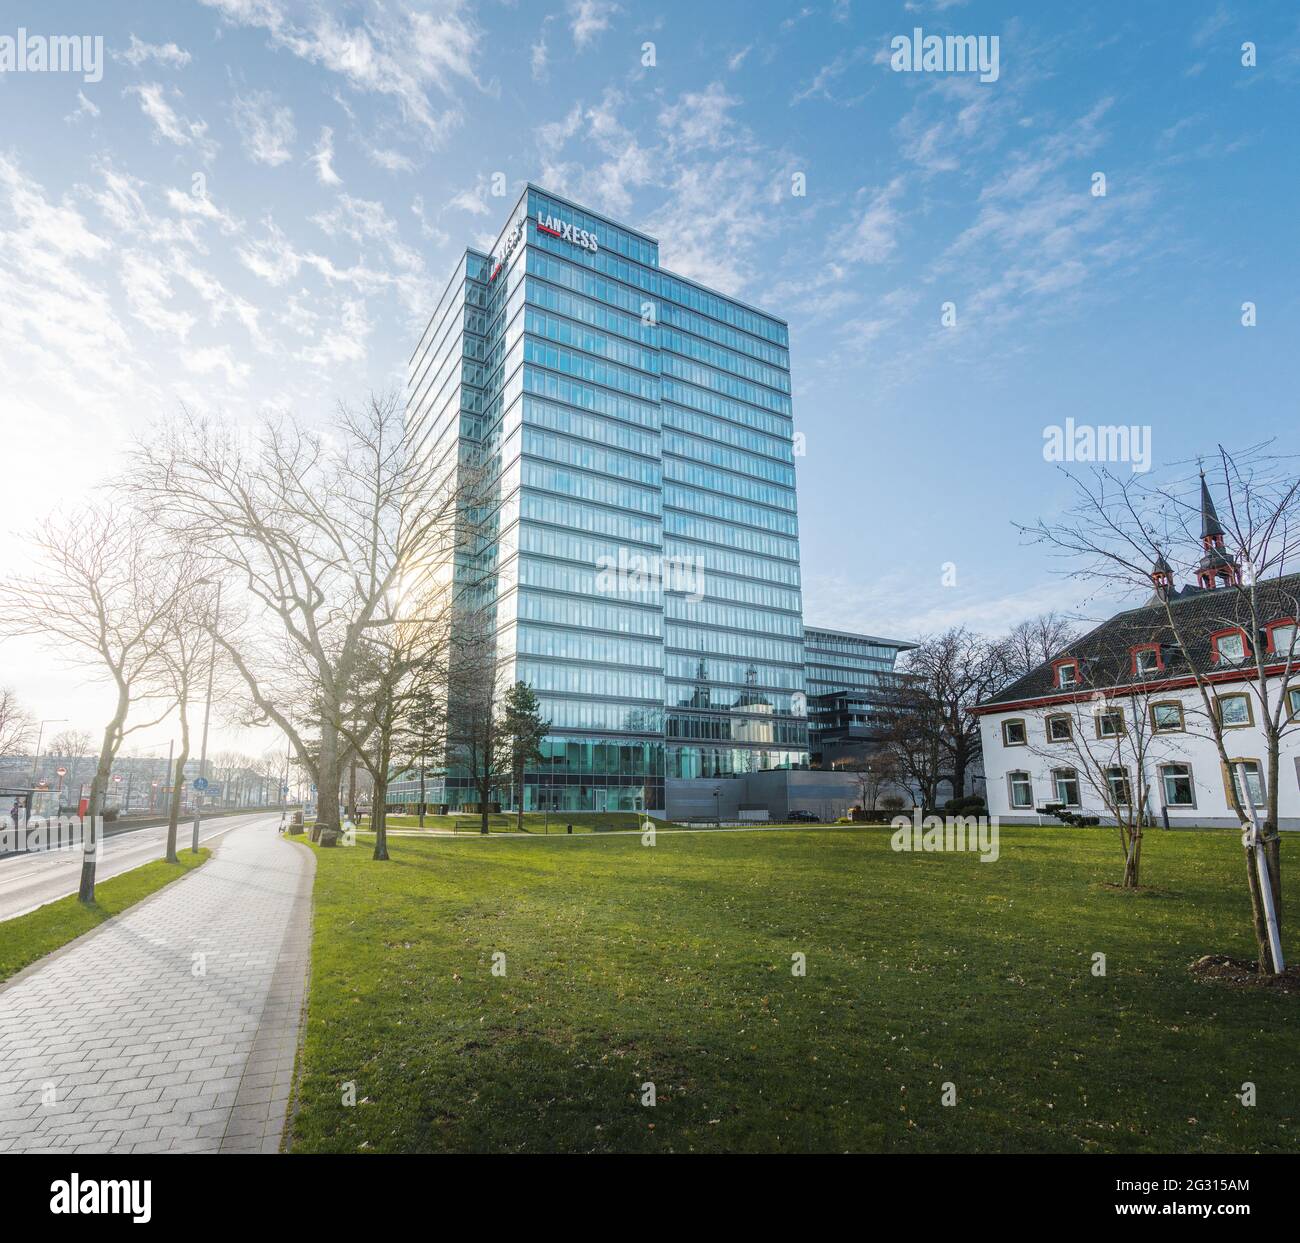 LanXESS Tower - headquarters of the German Speciality Chemicals Company - Cologne, Germany Stock Photo